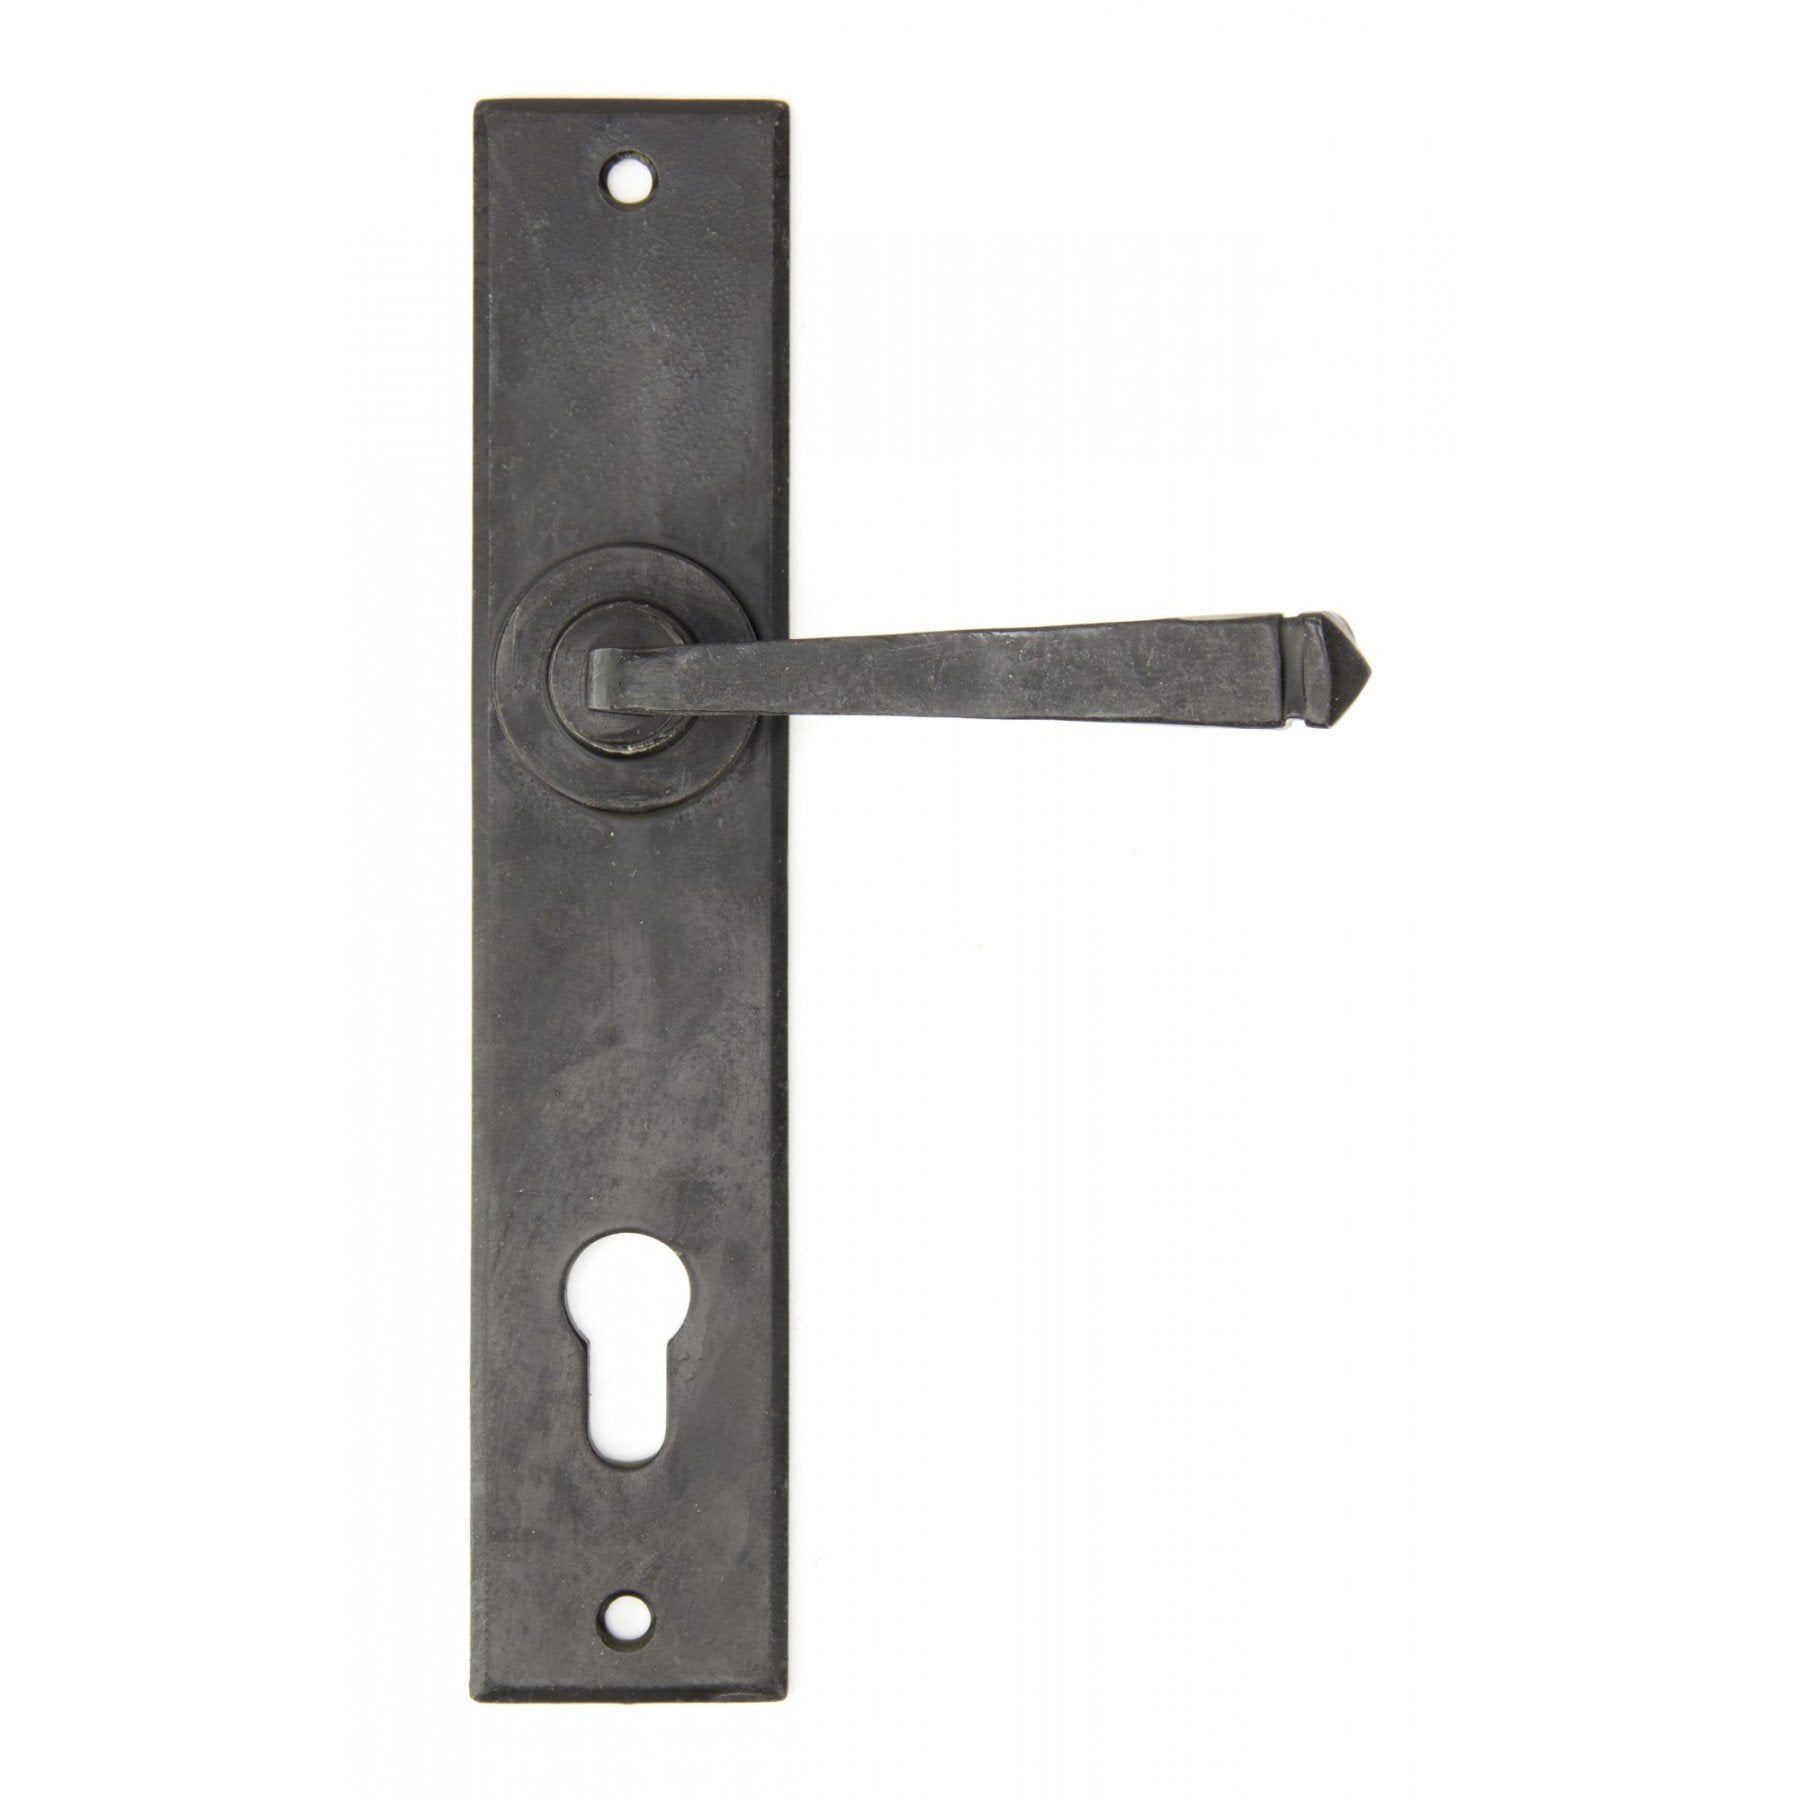 From the Anvil External Beeswax Avon Lever Espag. Lock Set - No.42 Interiors